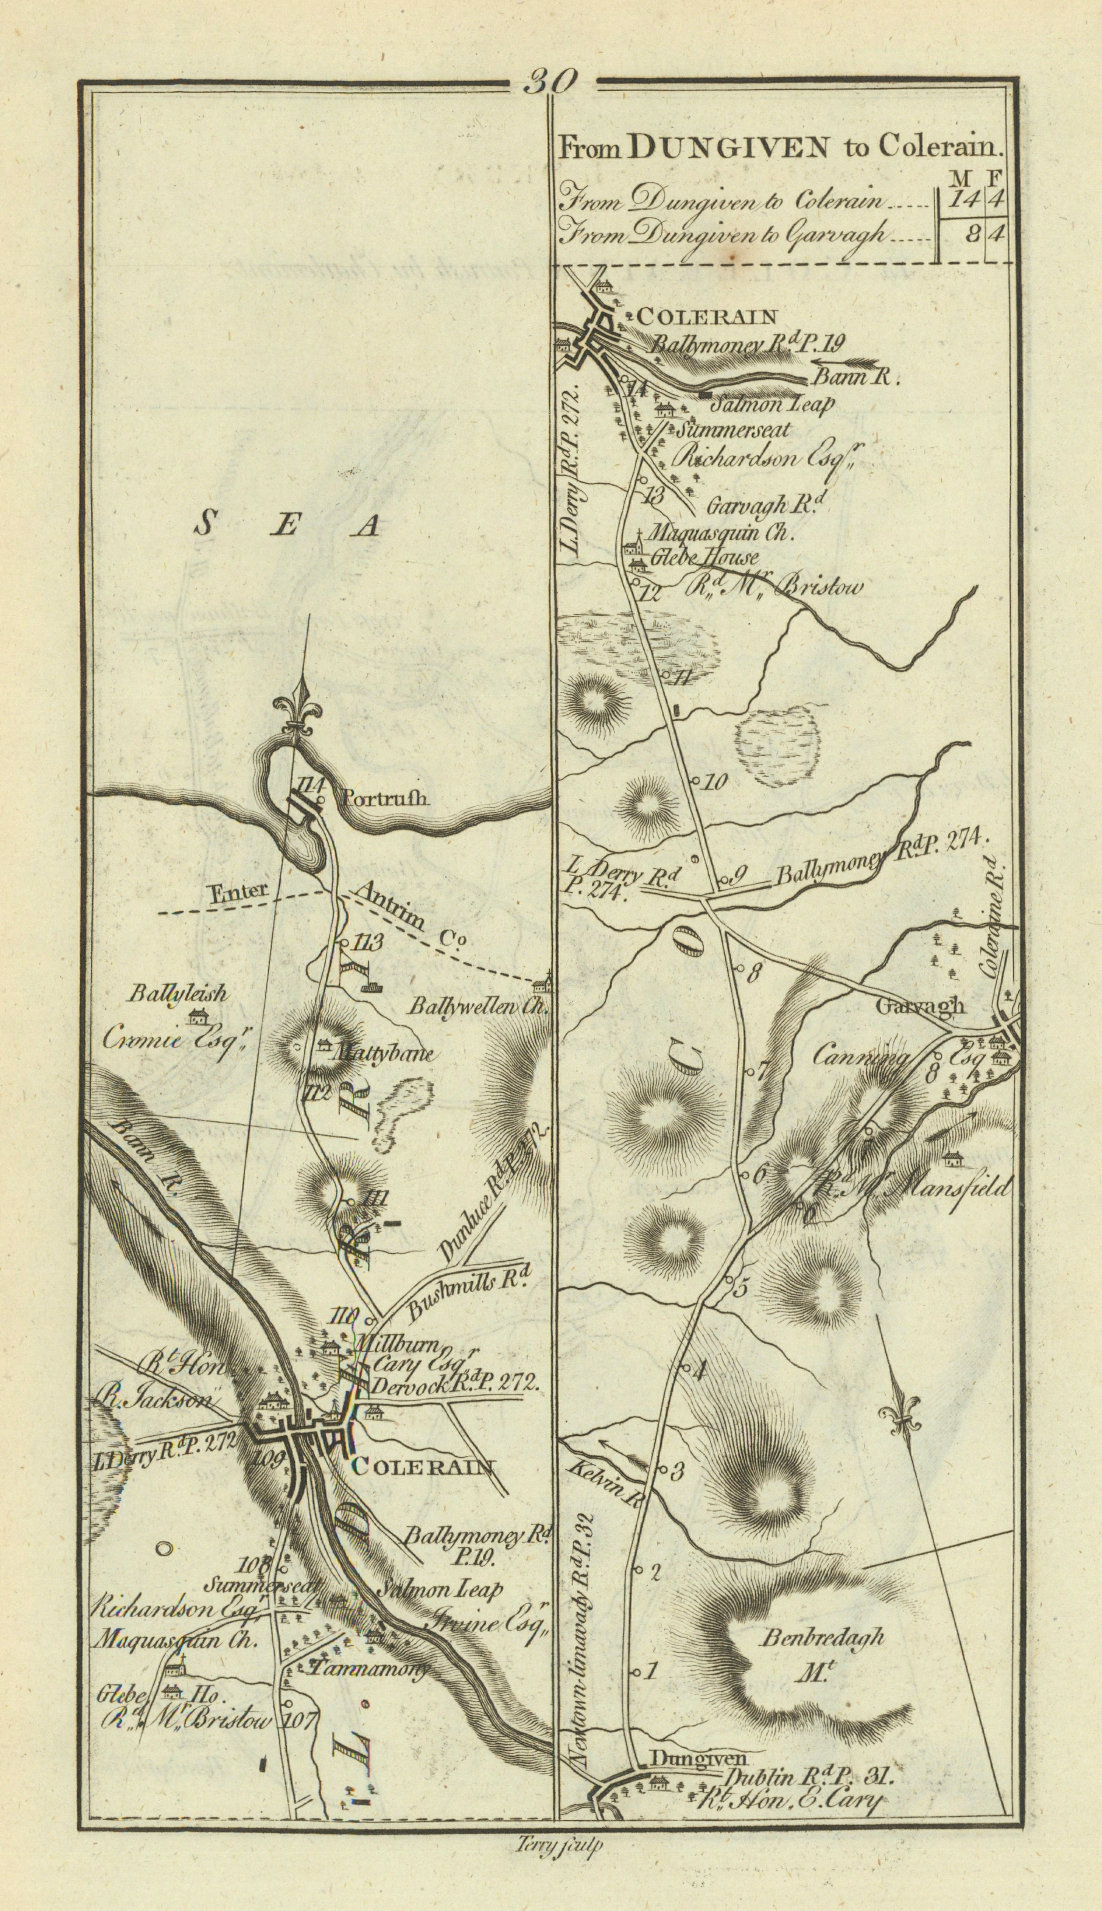 #30 From Dungiven to Coleraine. Portrush Garvagh. TAYLOR/SKINNER 1778 old map